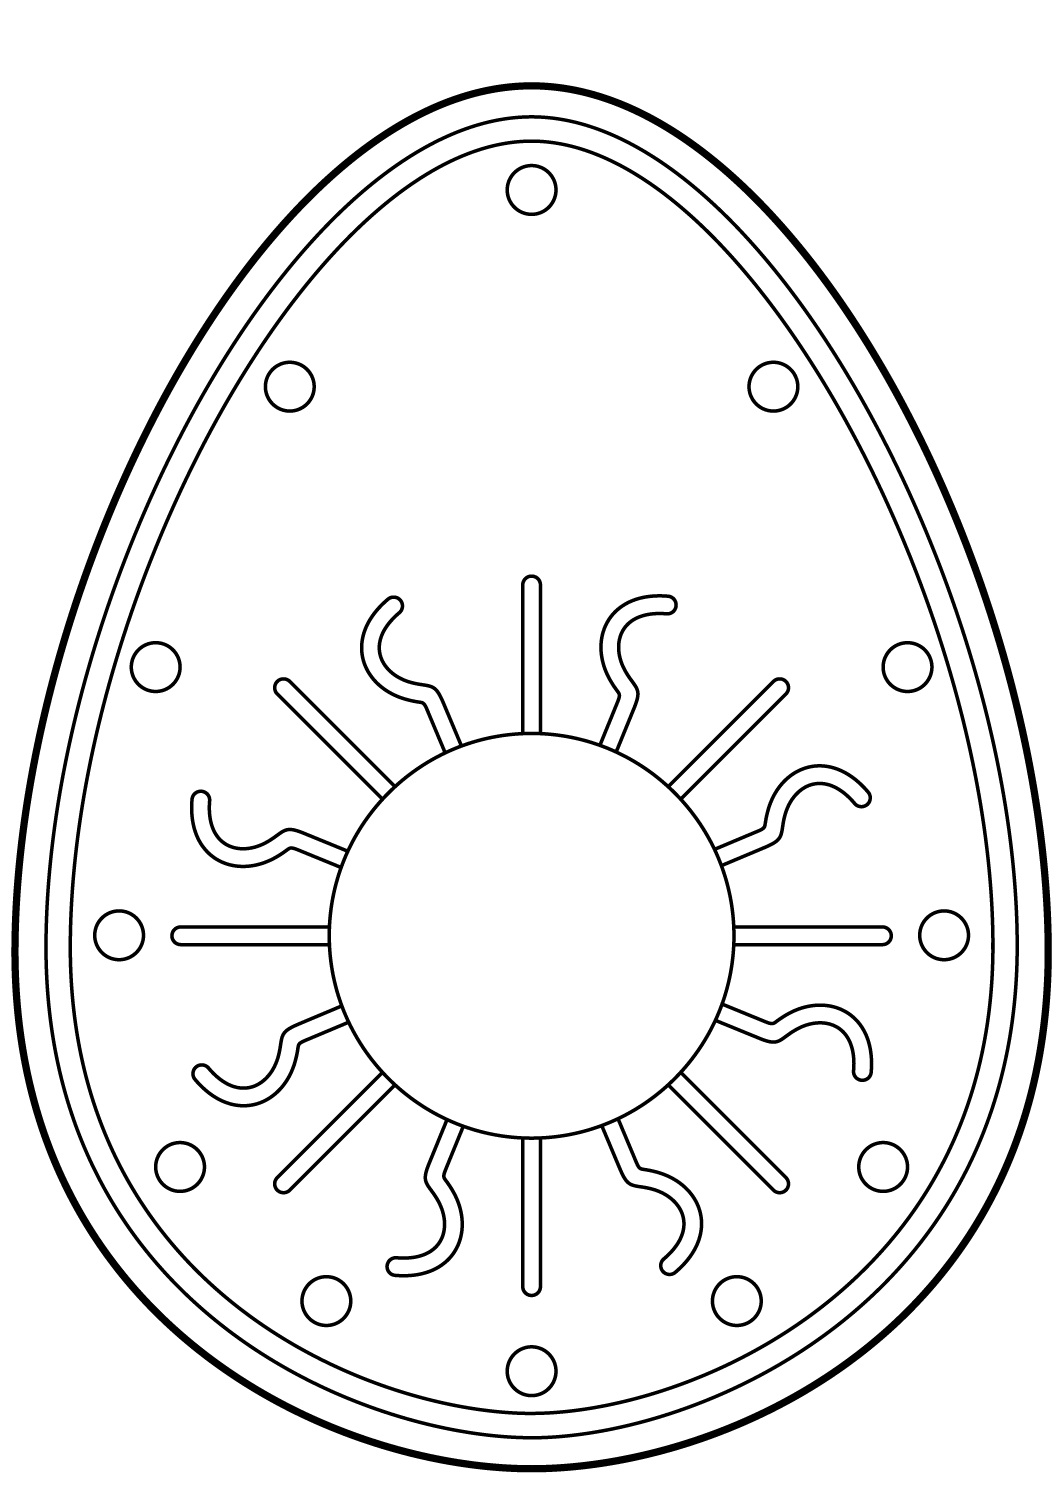 Easter Egg with Sun Pattern Coloring Pages